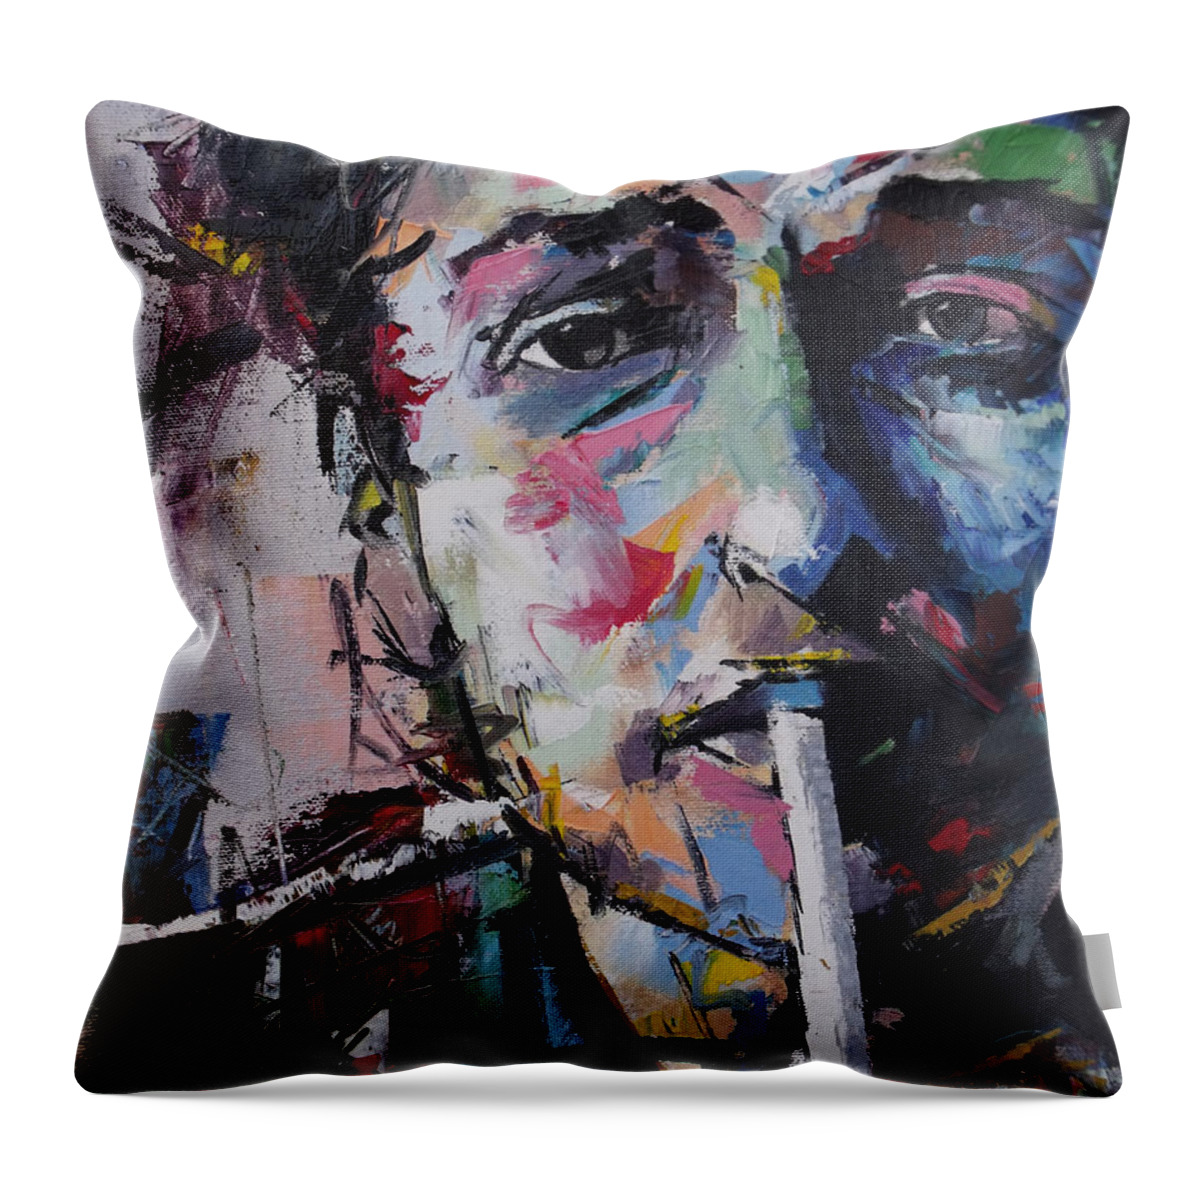 Bob Dylan Throw Pillow featuring the painting Bob Dylan by Richard Day